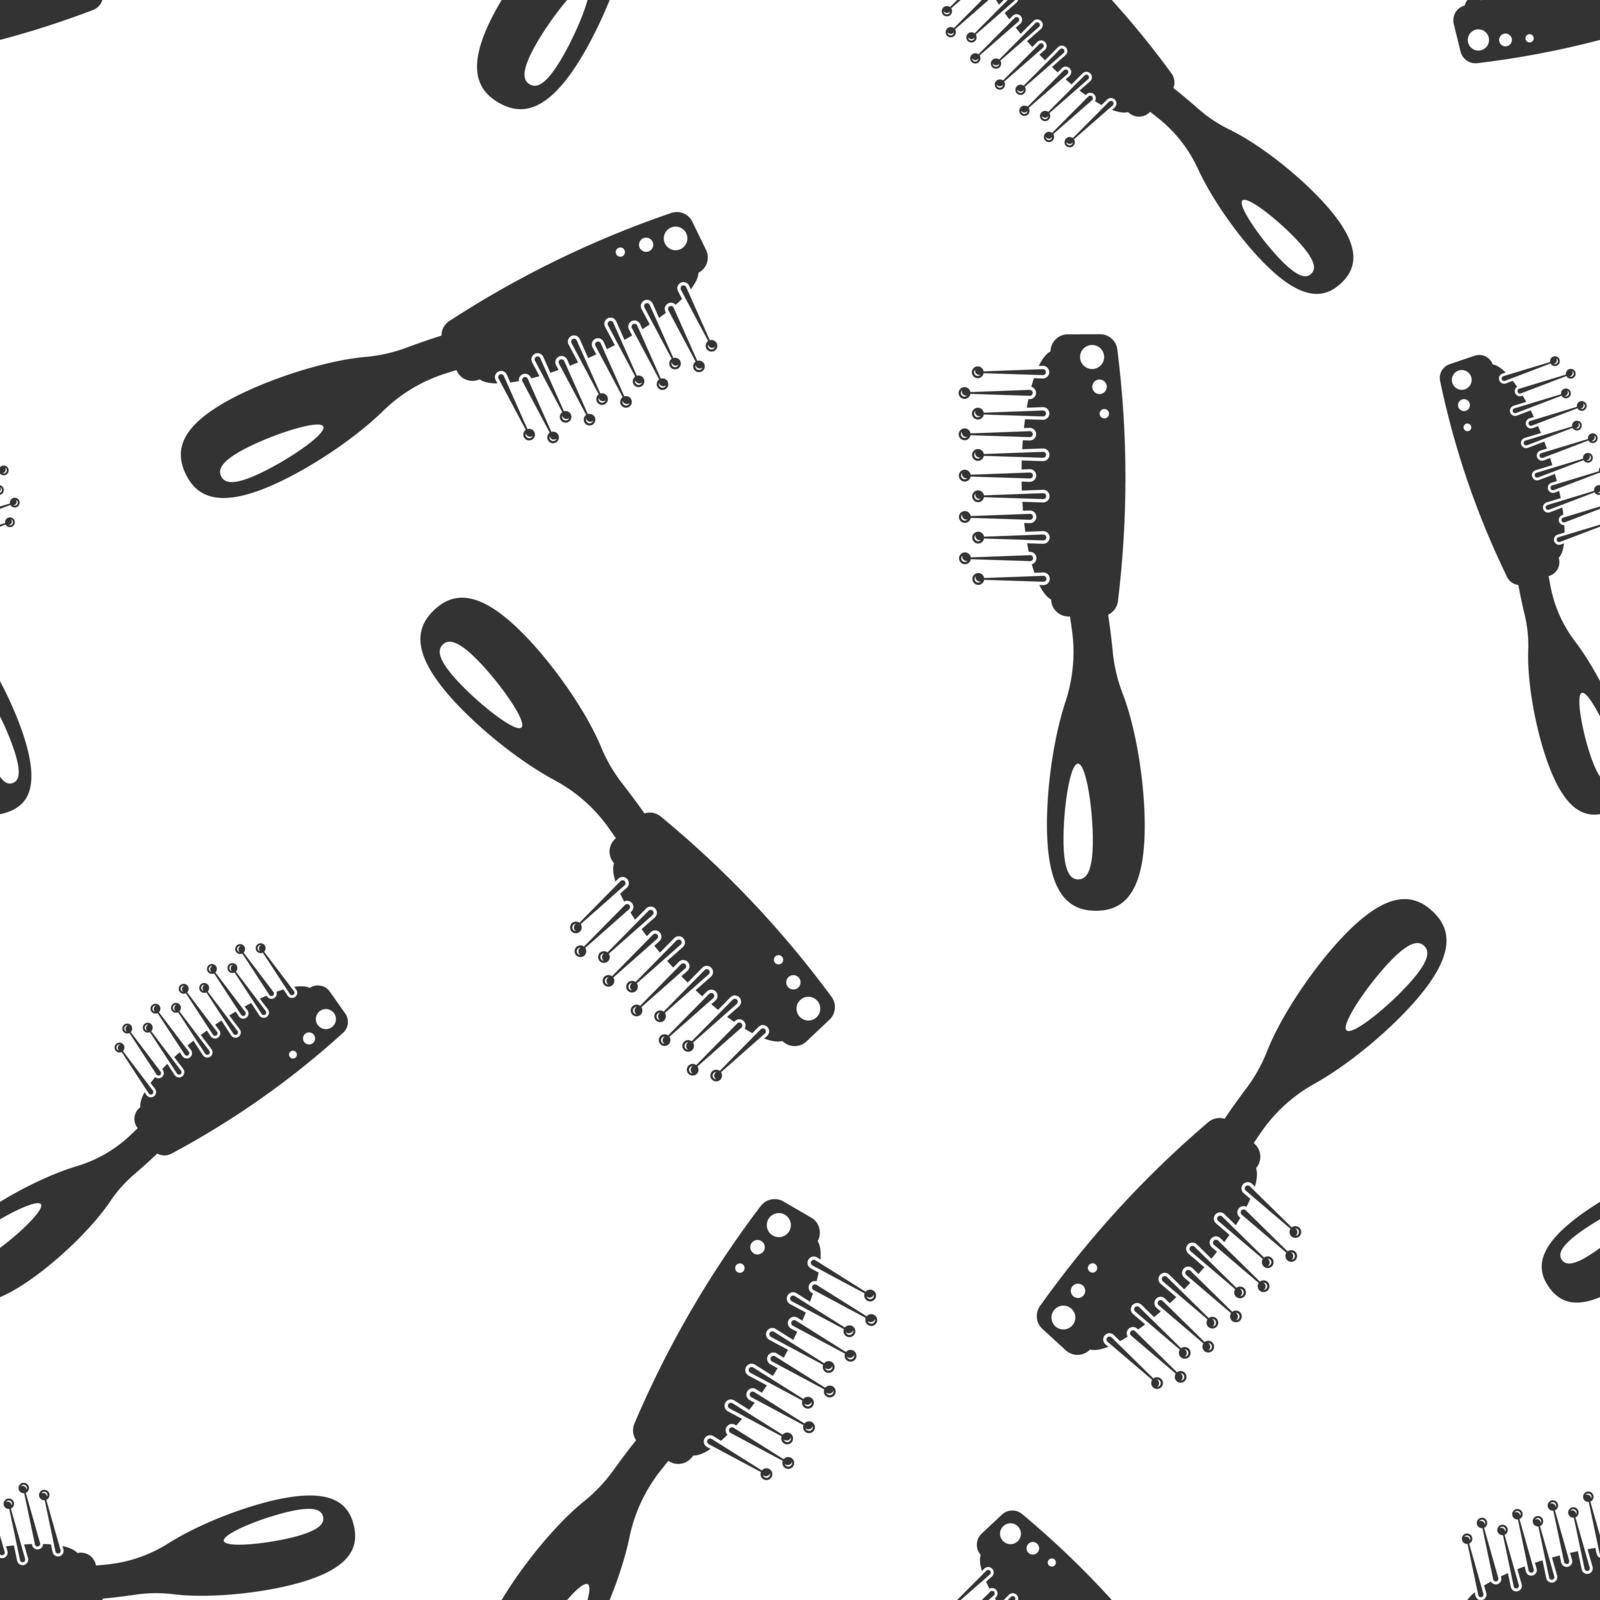 Hair brush icon seamless pattern background. Comb accessory vector illustration. Hairbrush symbol pattern. by LysenkoA